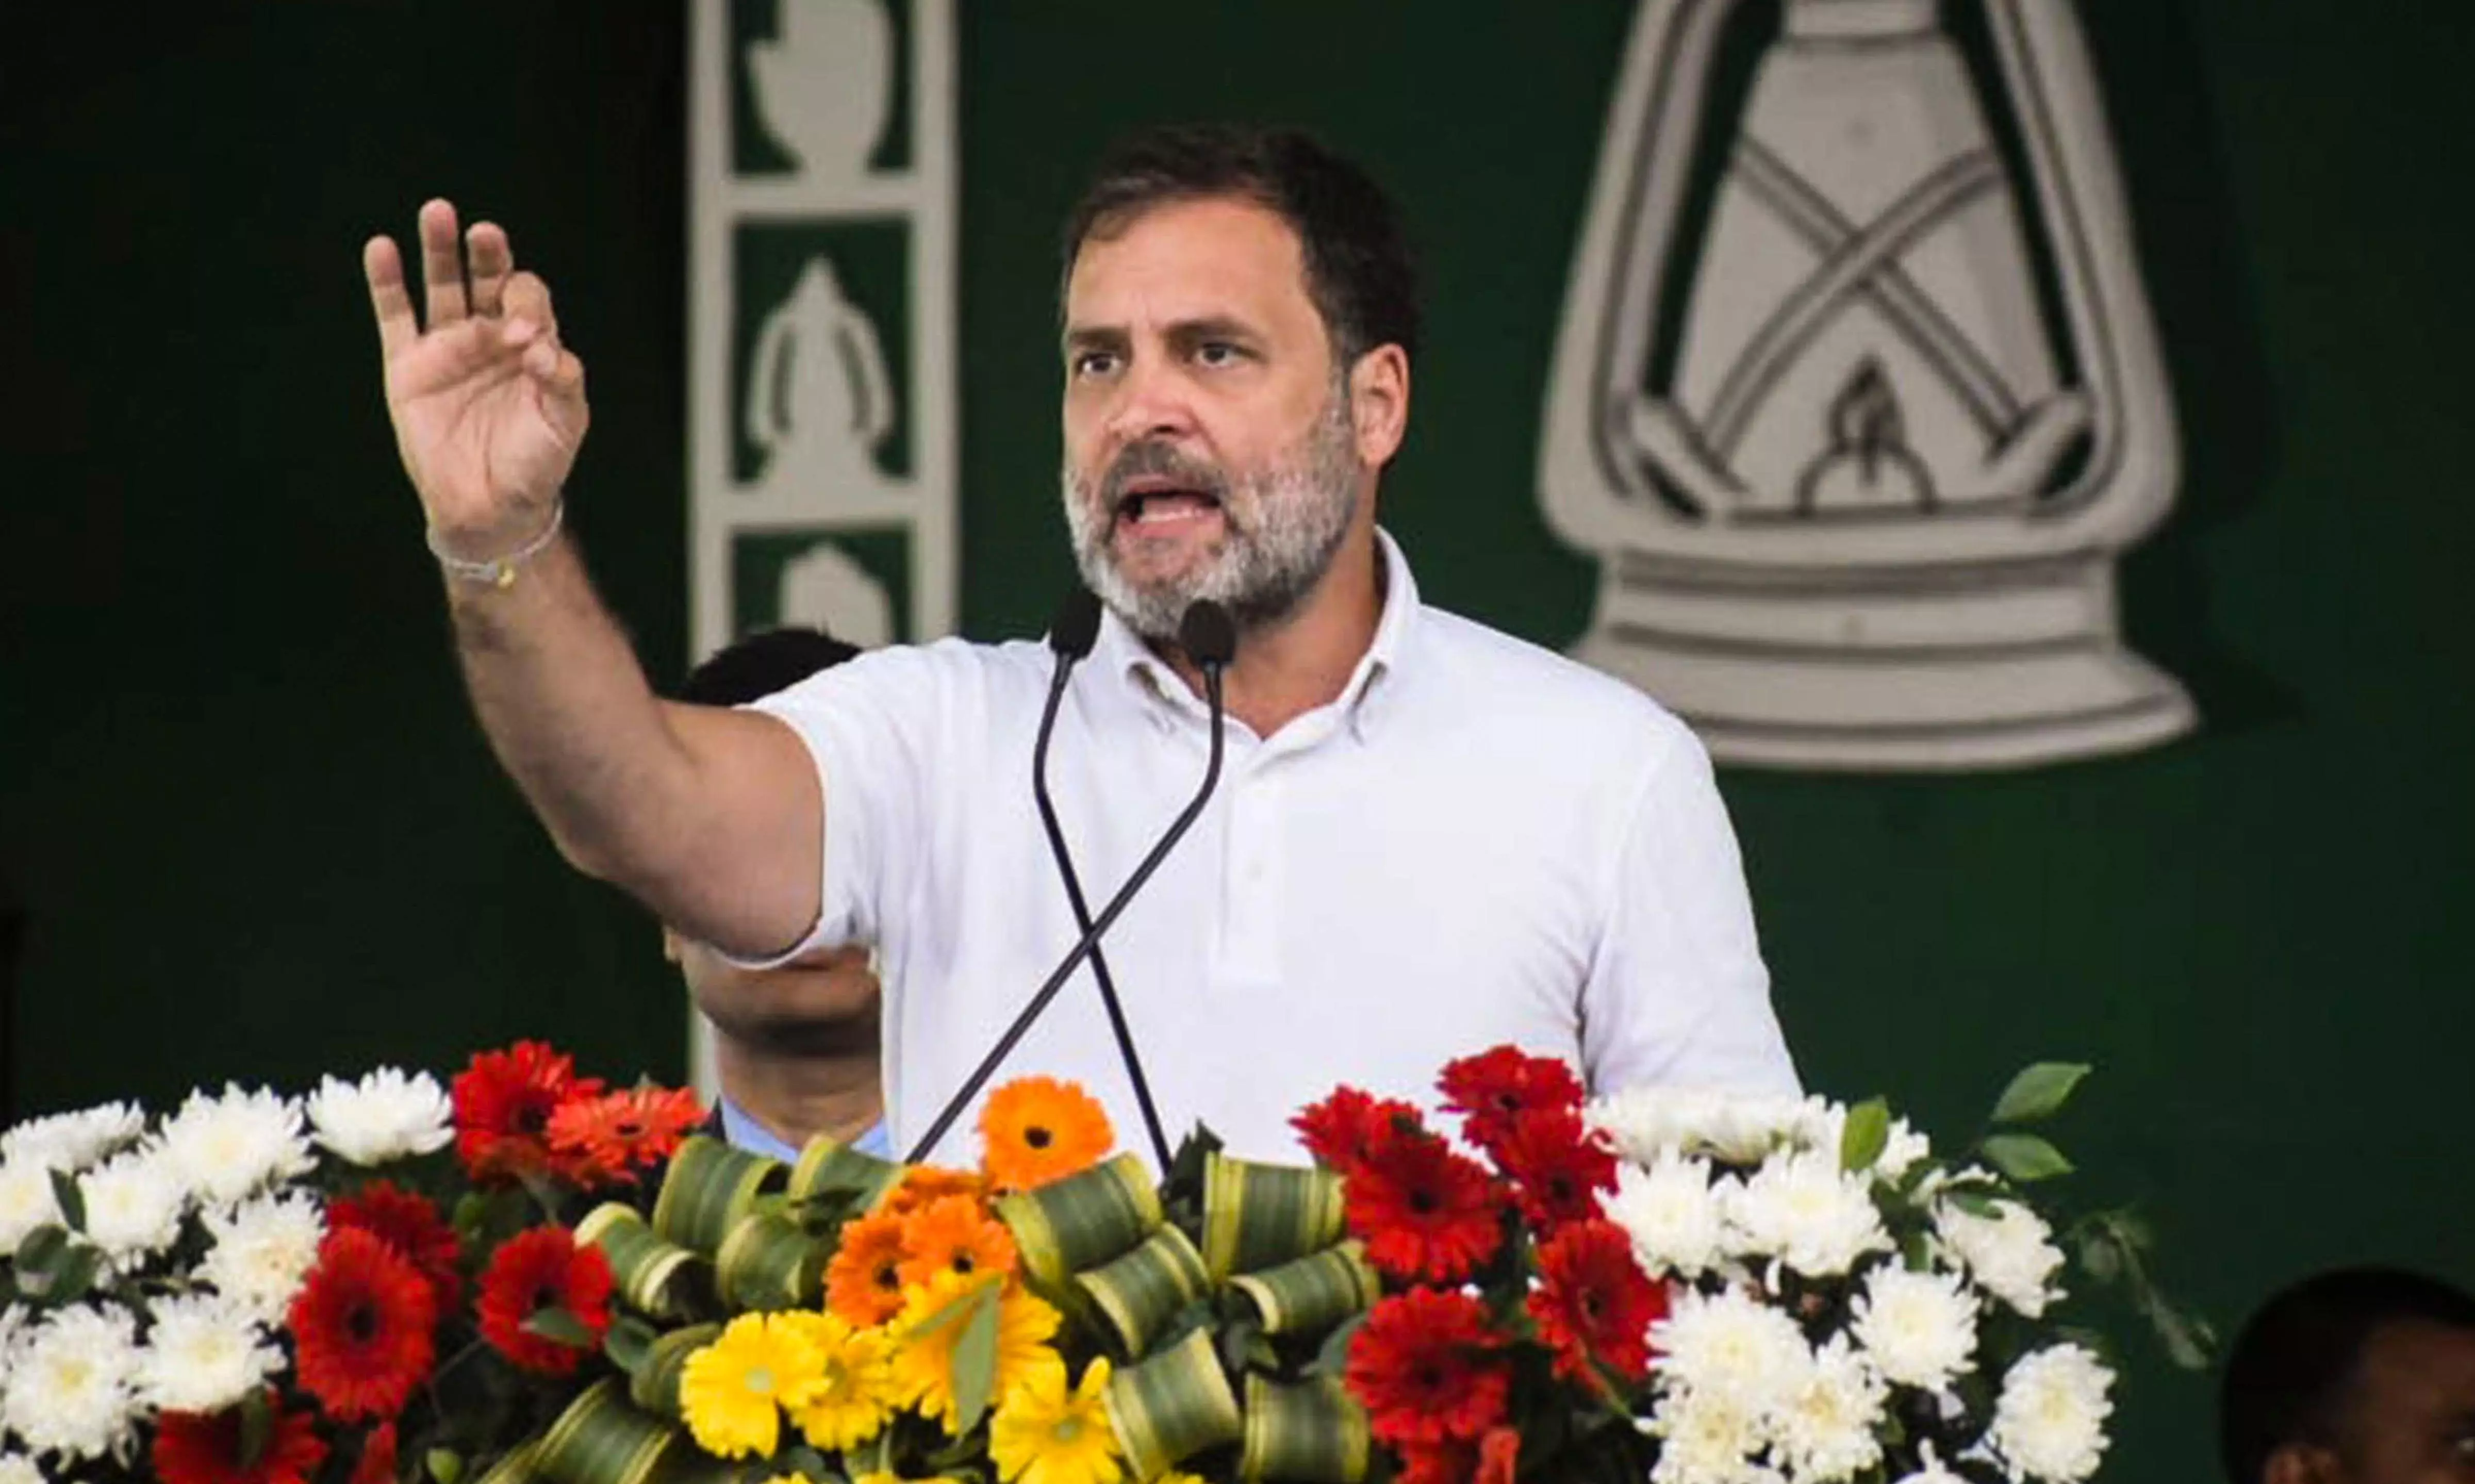 I.N.D.I.A. bloc will open doors for jobs, says Rahul